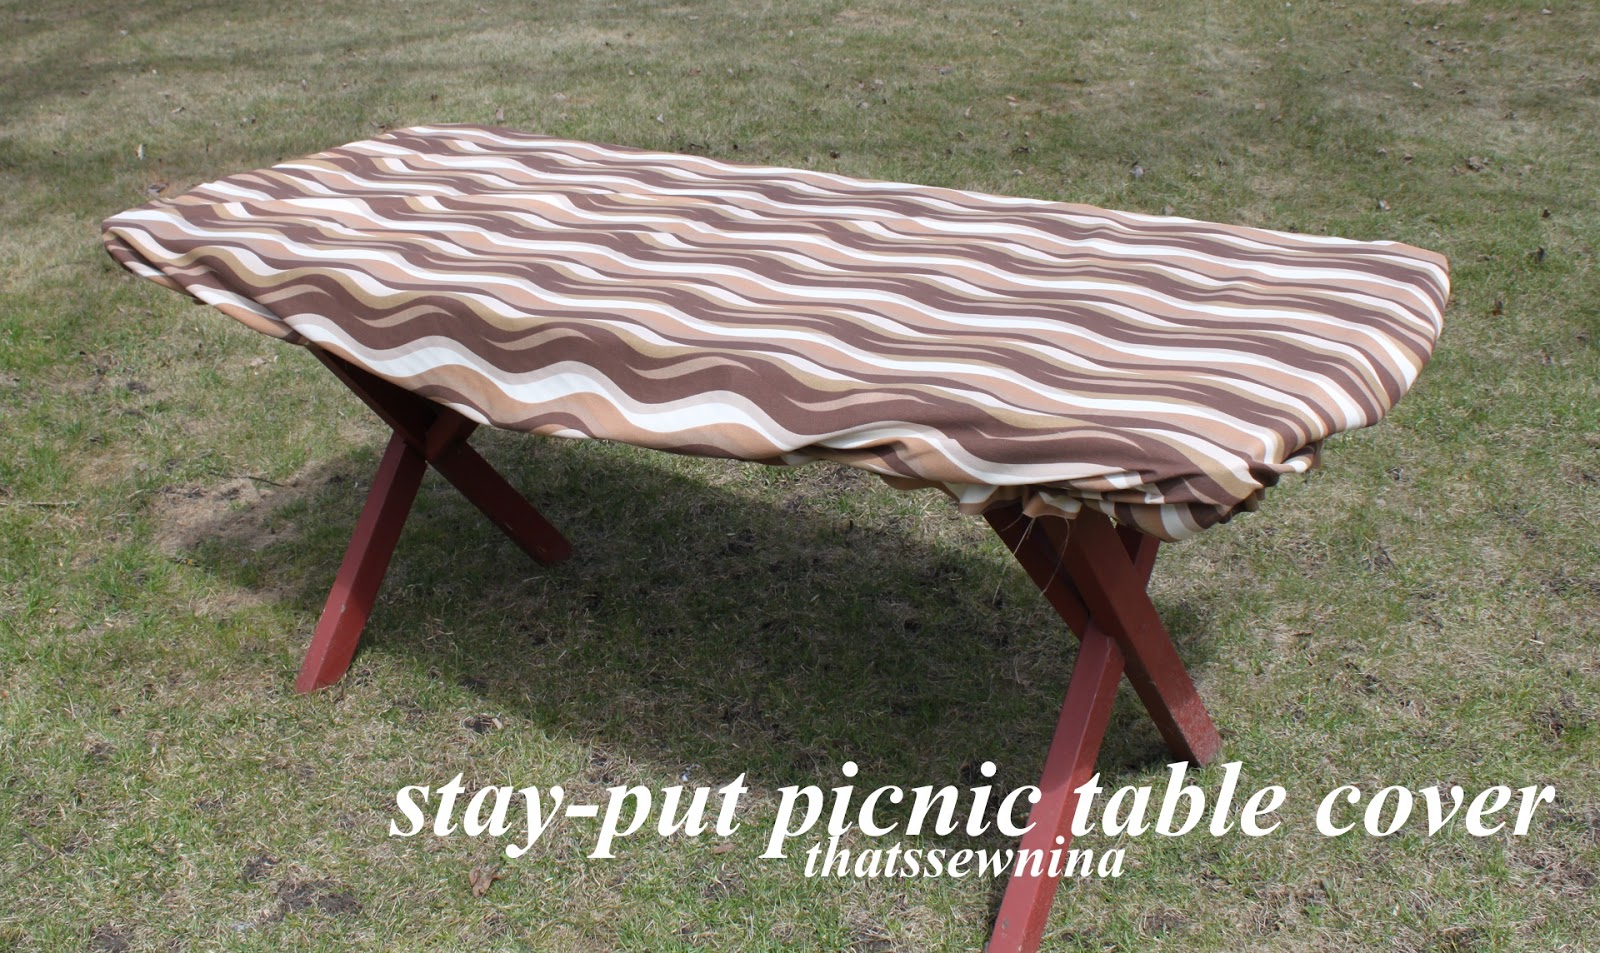 thatssewnina: Great Idea: a Stay-Put Picnic Table Cover